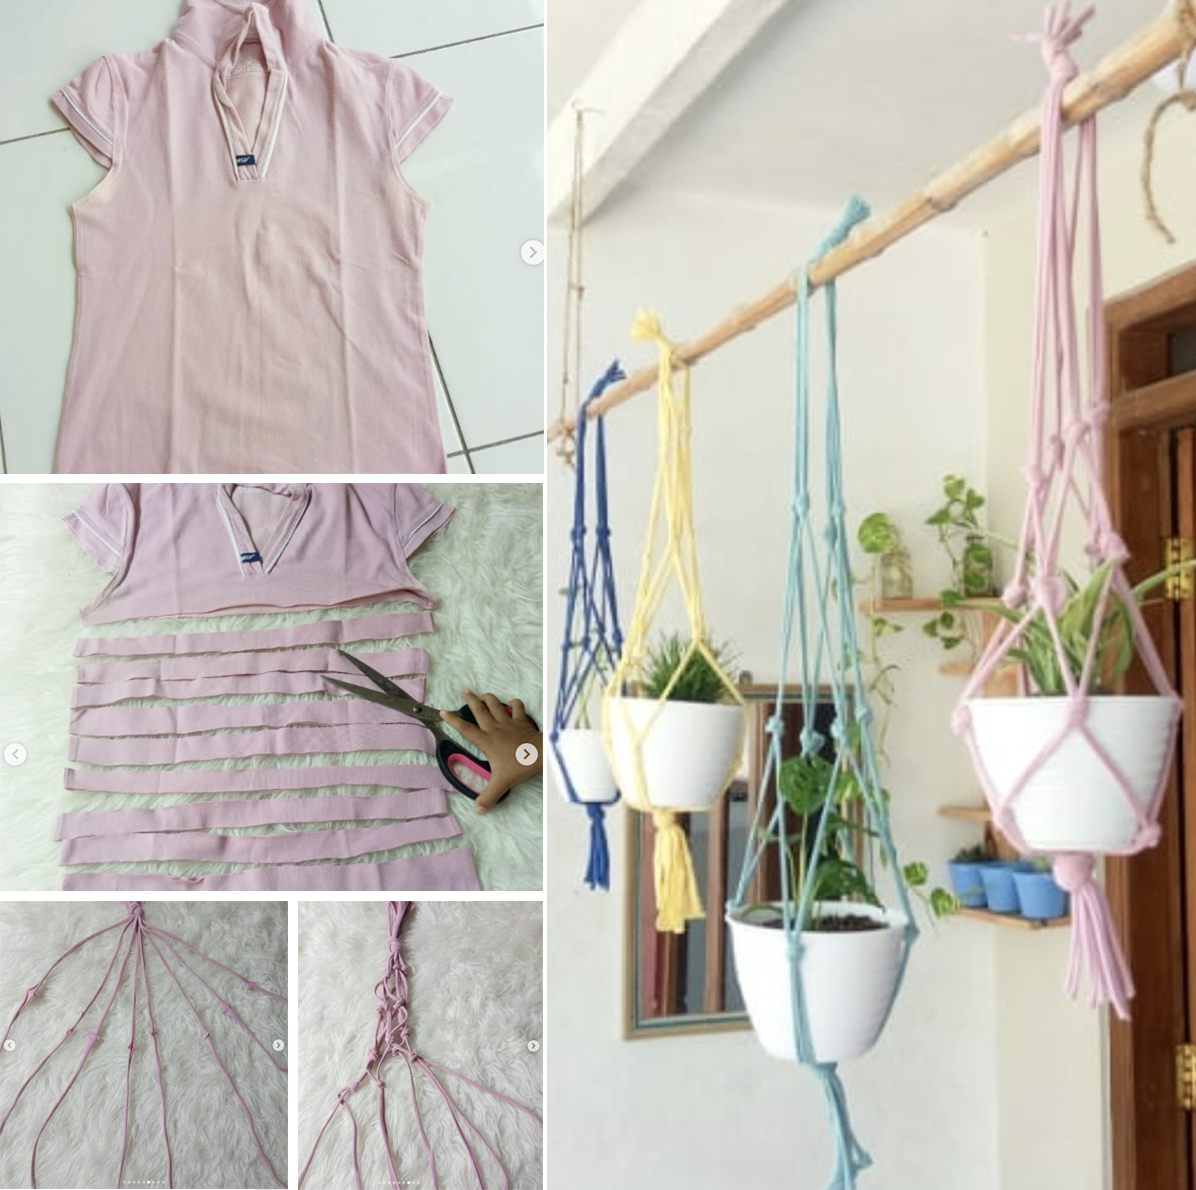 21 Actually Useful Things You Can Make Out Of Your Old Clothes